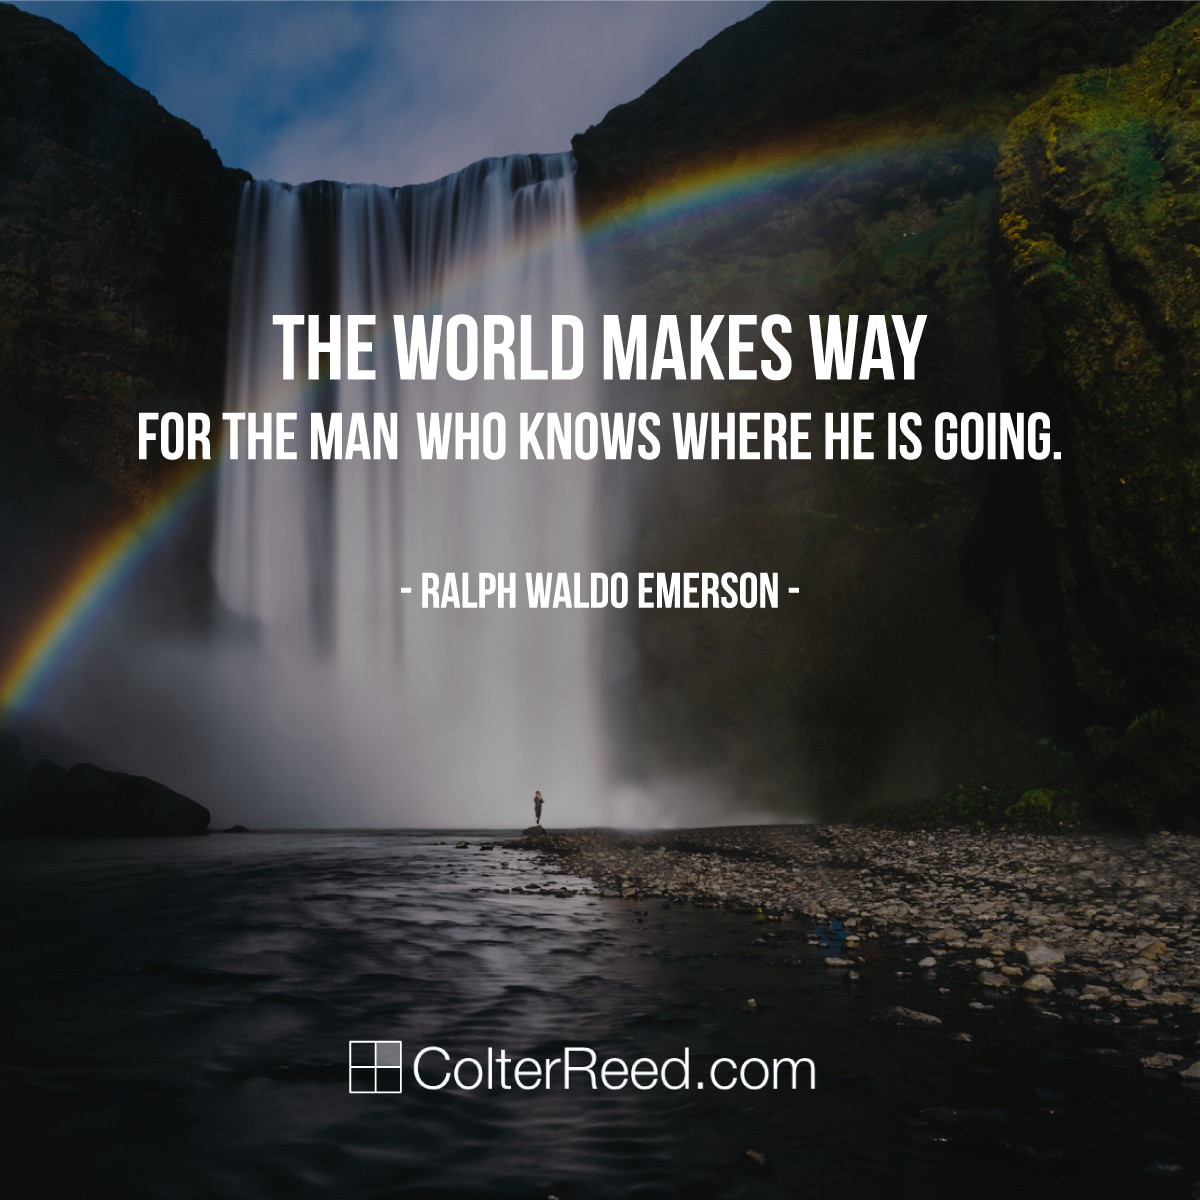 The world makes way for the man who knows where he is going. —Ralph Waldo Emerson